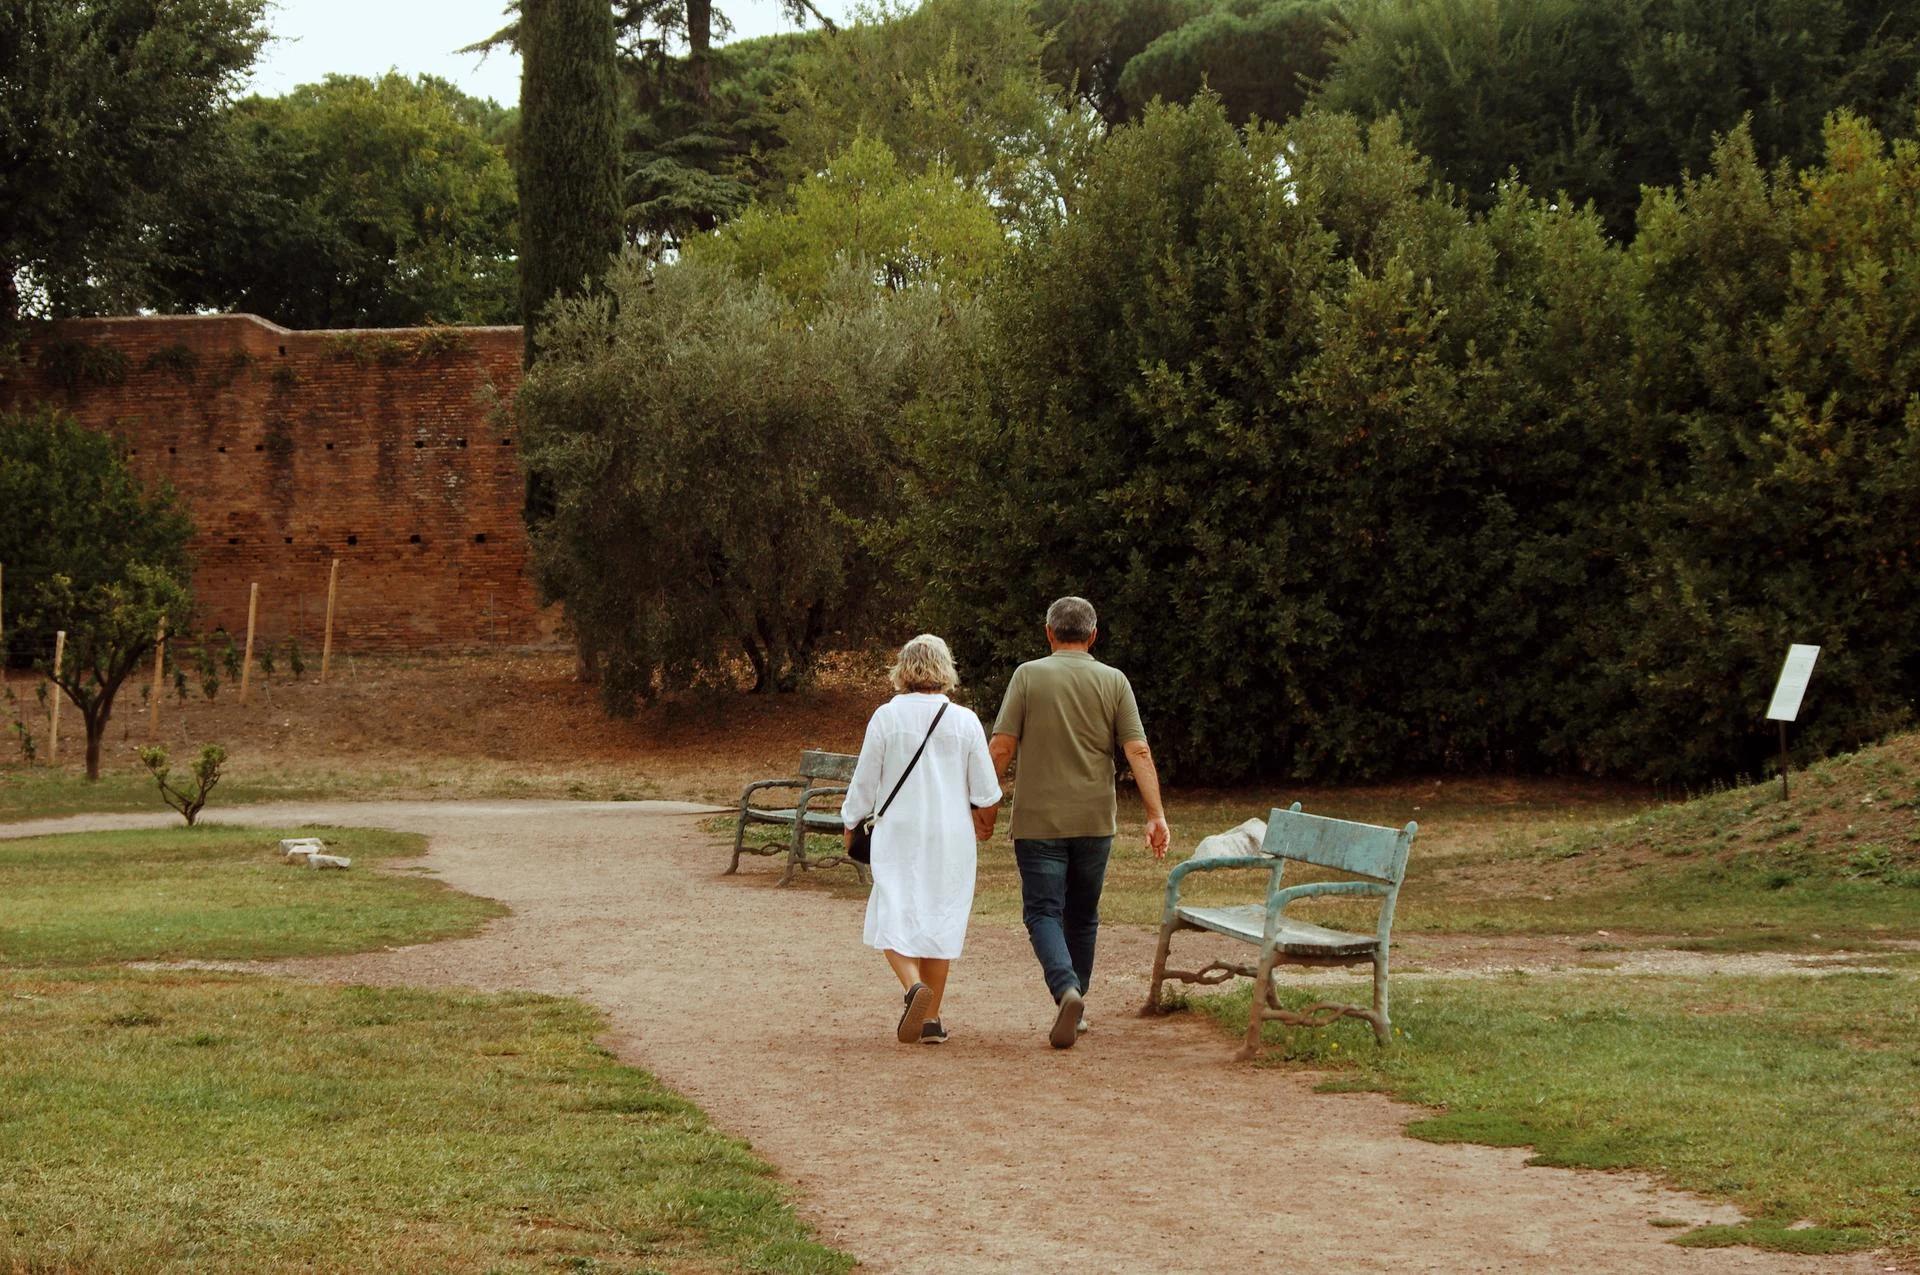 Old couple on a stroll in a park